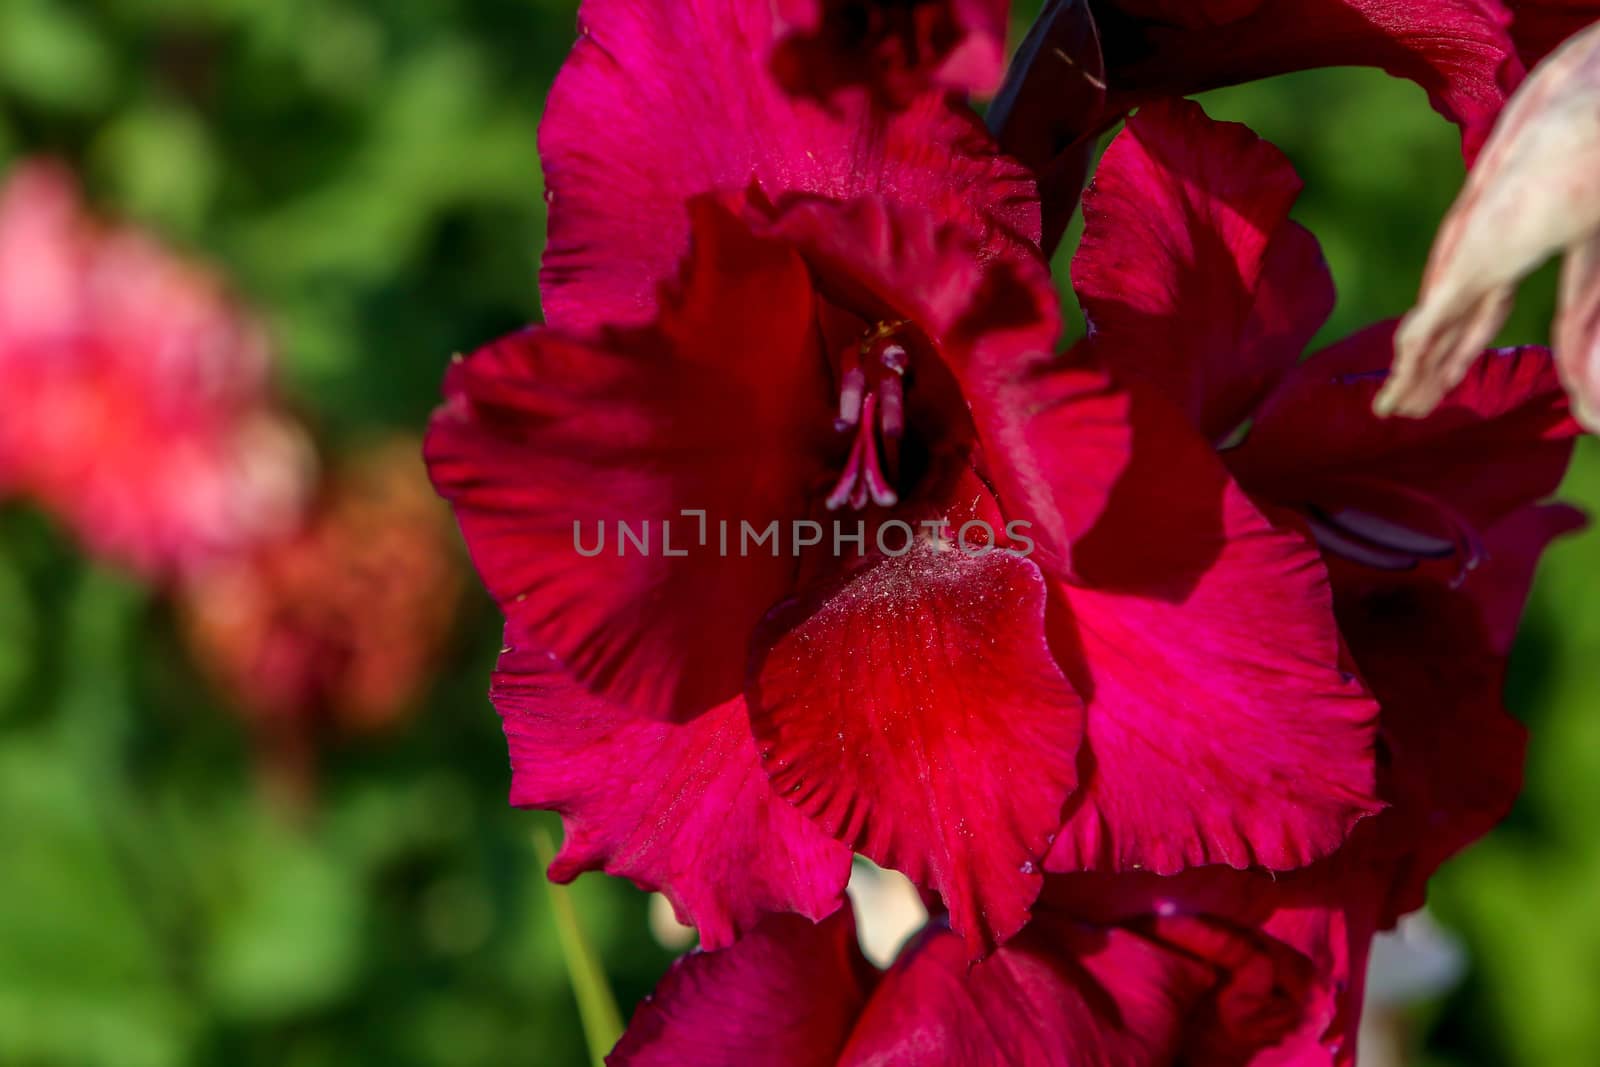 Dark red gladiolus flowers blooming in beautiful garden. Dark red gladiolus. Gladiolus is plant of the iris family, with sword-shaped leaves and spikes of brightly colored flowers, popular in gardens and as a cut flower.

